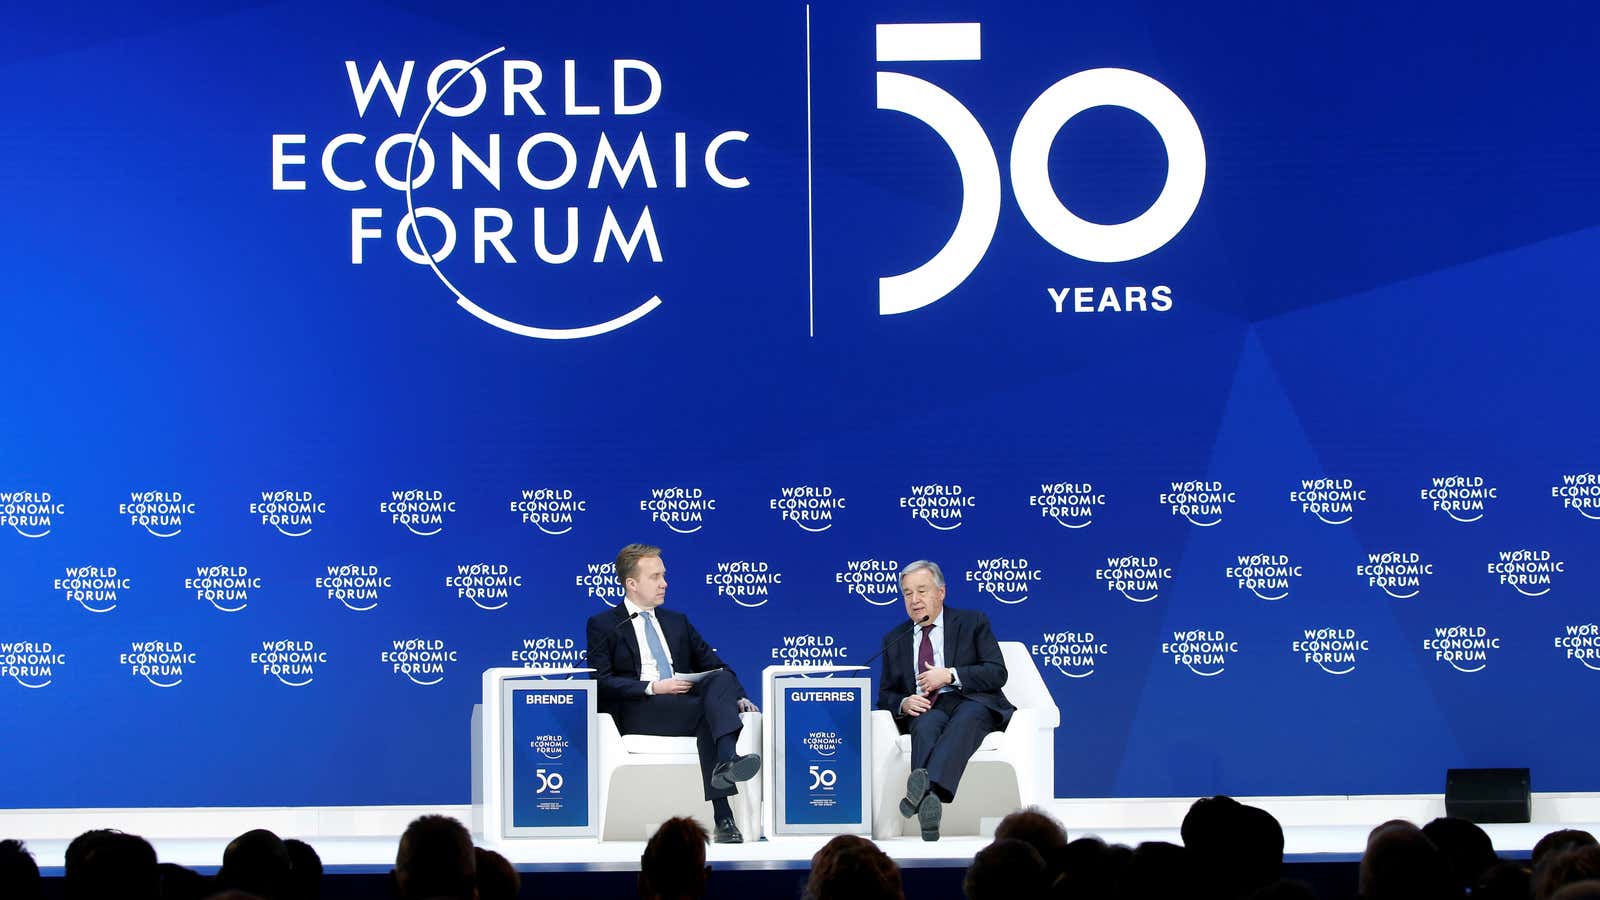 The s-word was inescapable at the 50th World Economic Forum.